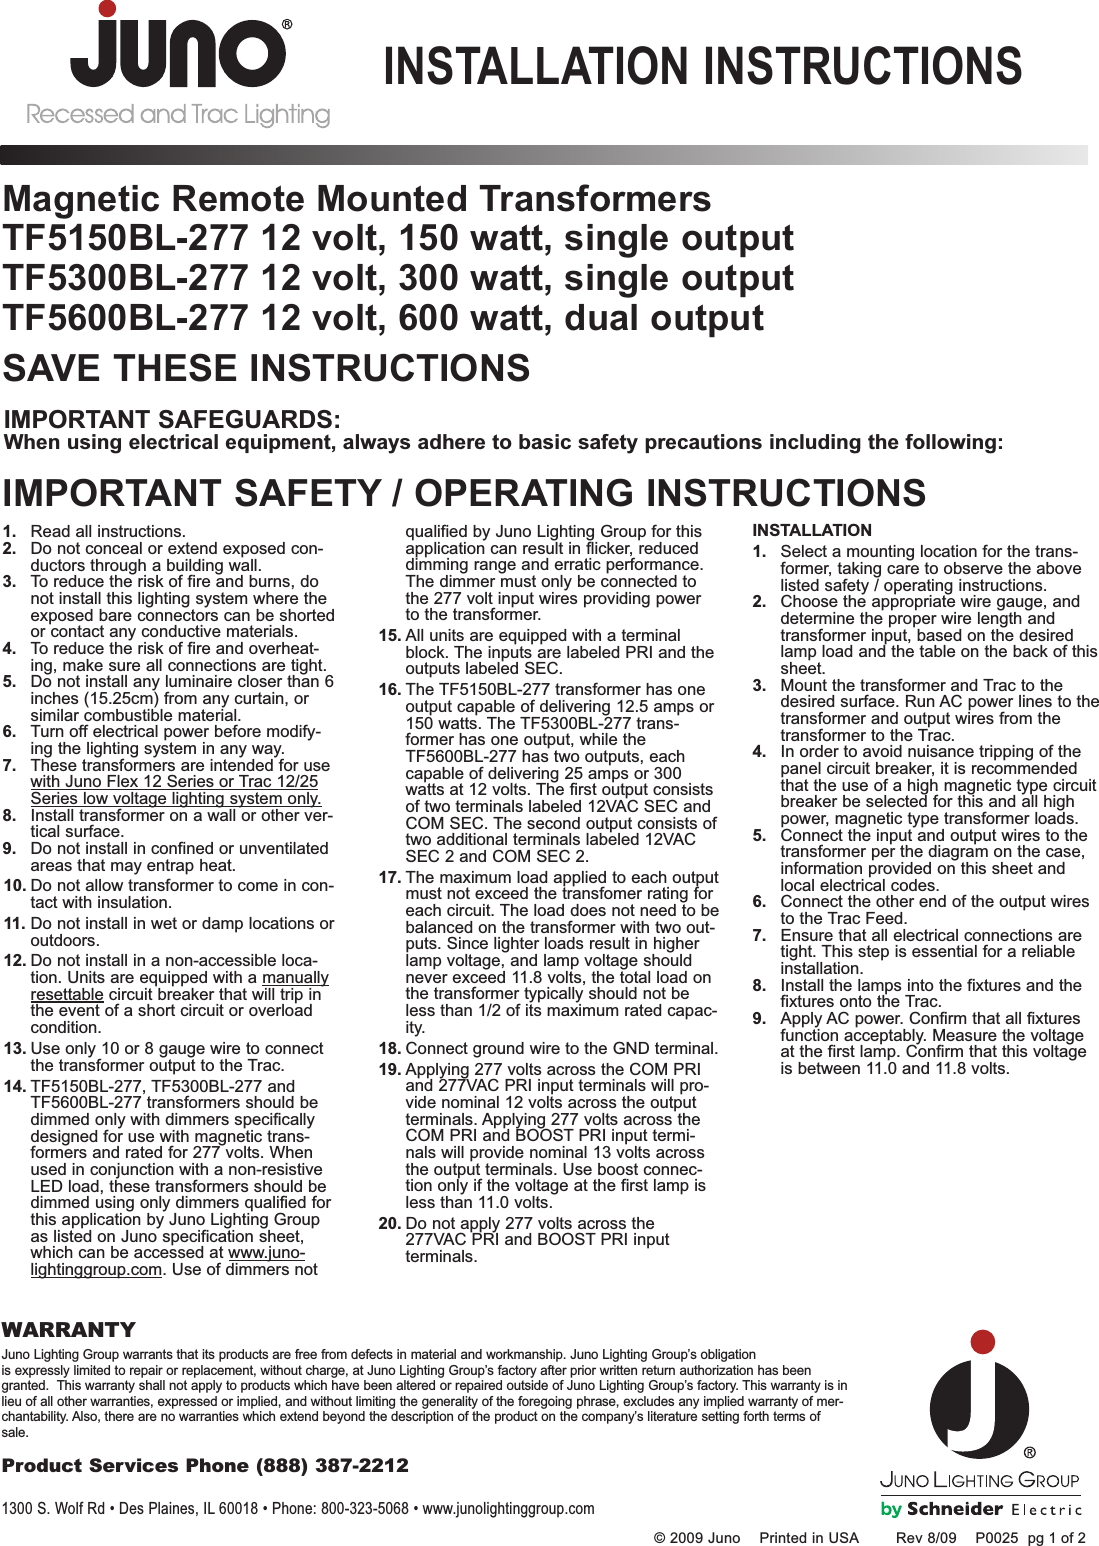 Page 1 of 2 - P0025rev8-09  Installation Directions